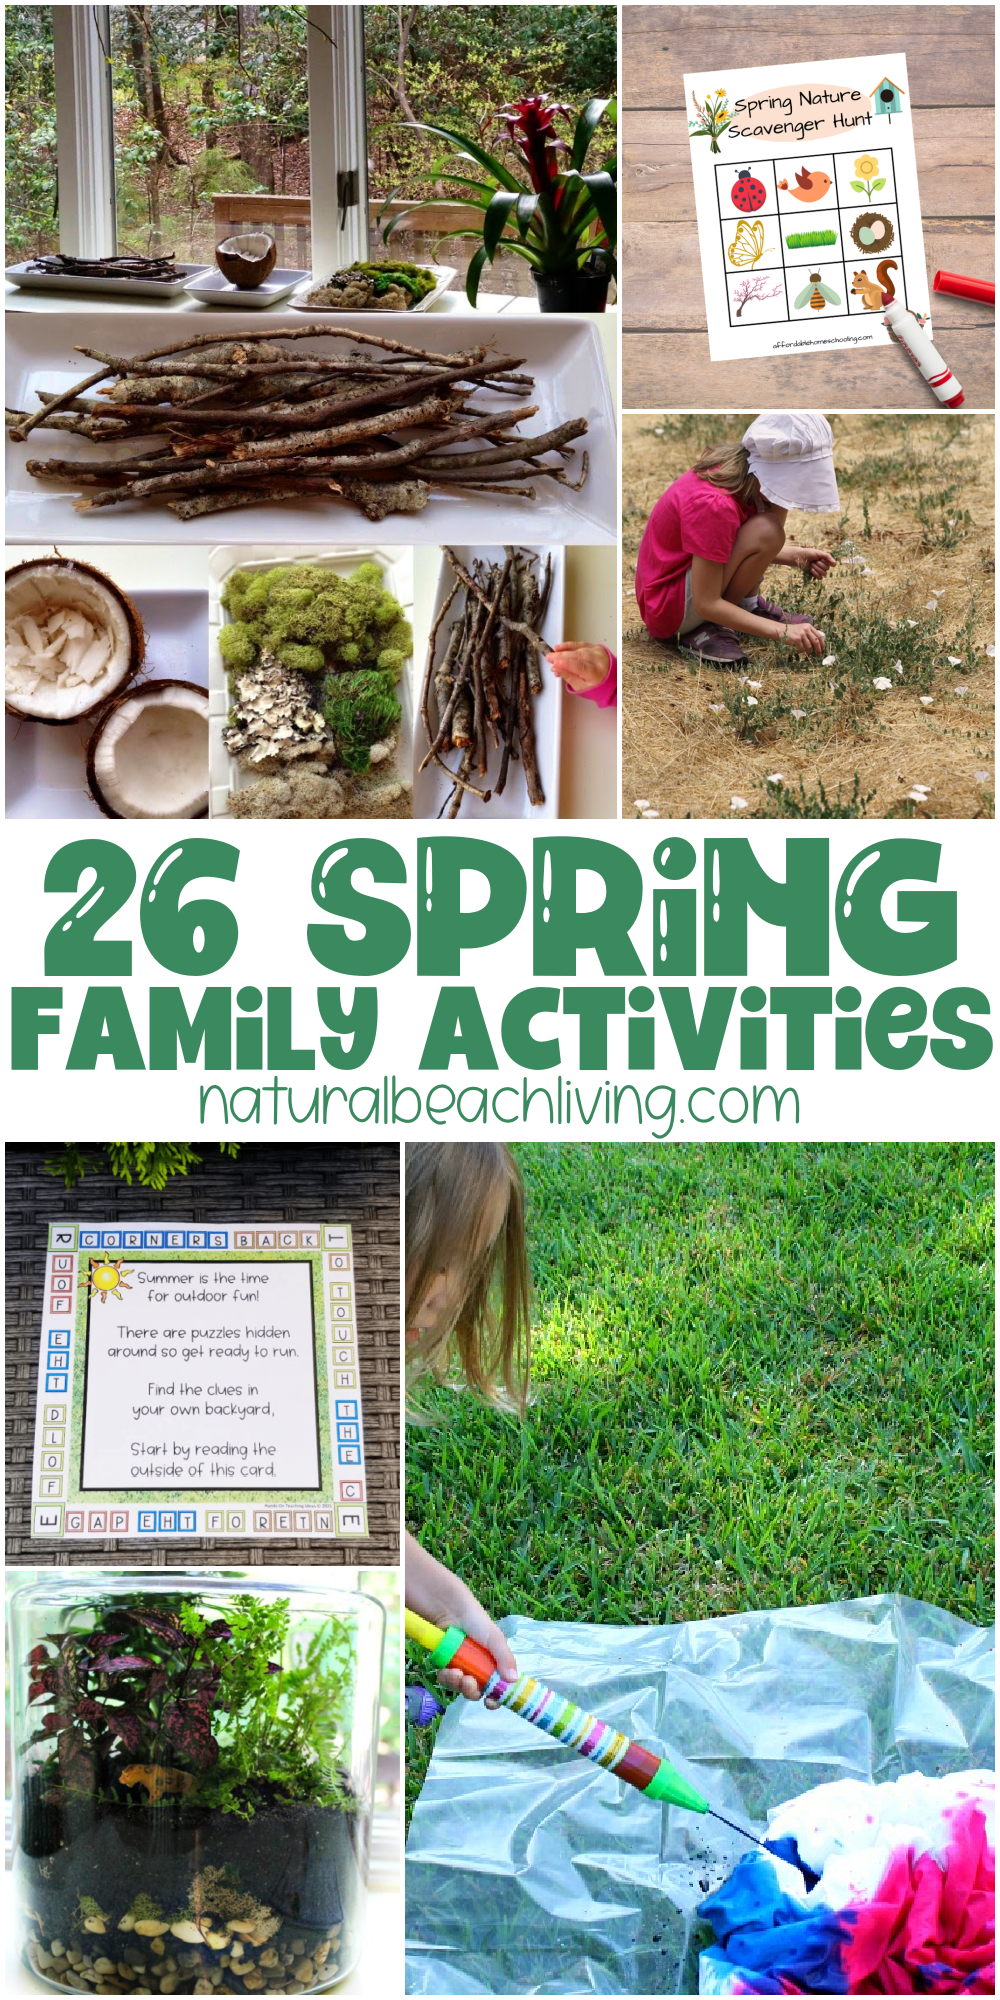 Step outside, enjoy the fresh air and have great family time with some of these fun spring activities for families. From exploring nature, and homemade bird feeders, to scavenger hunts, and family art projects together, there's something here for everyone. 